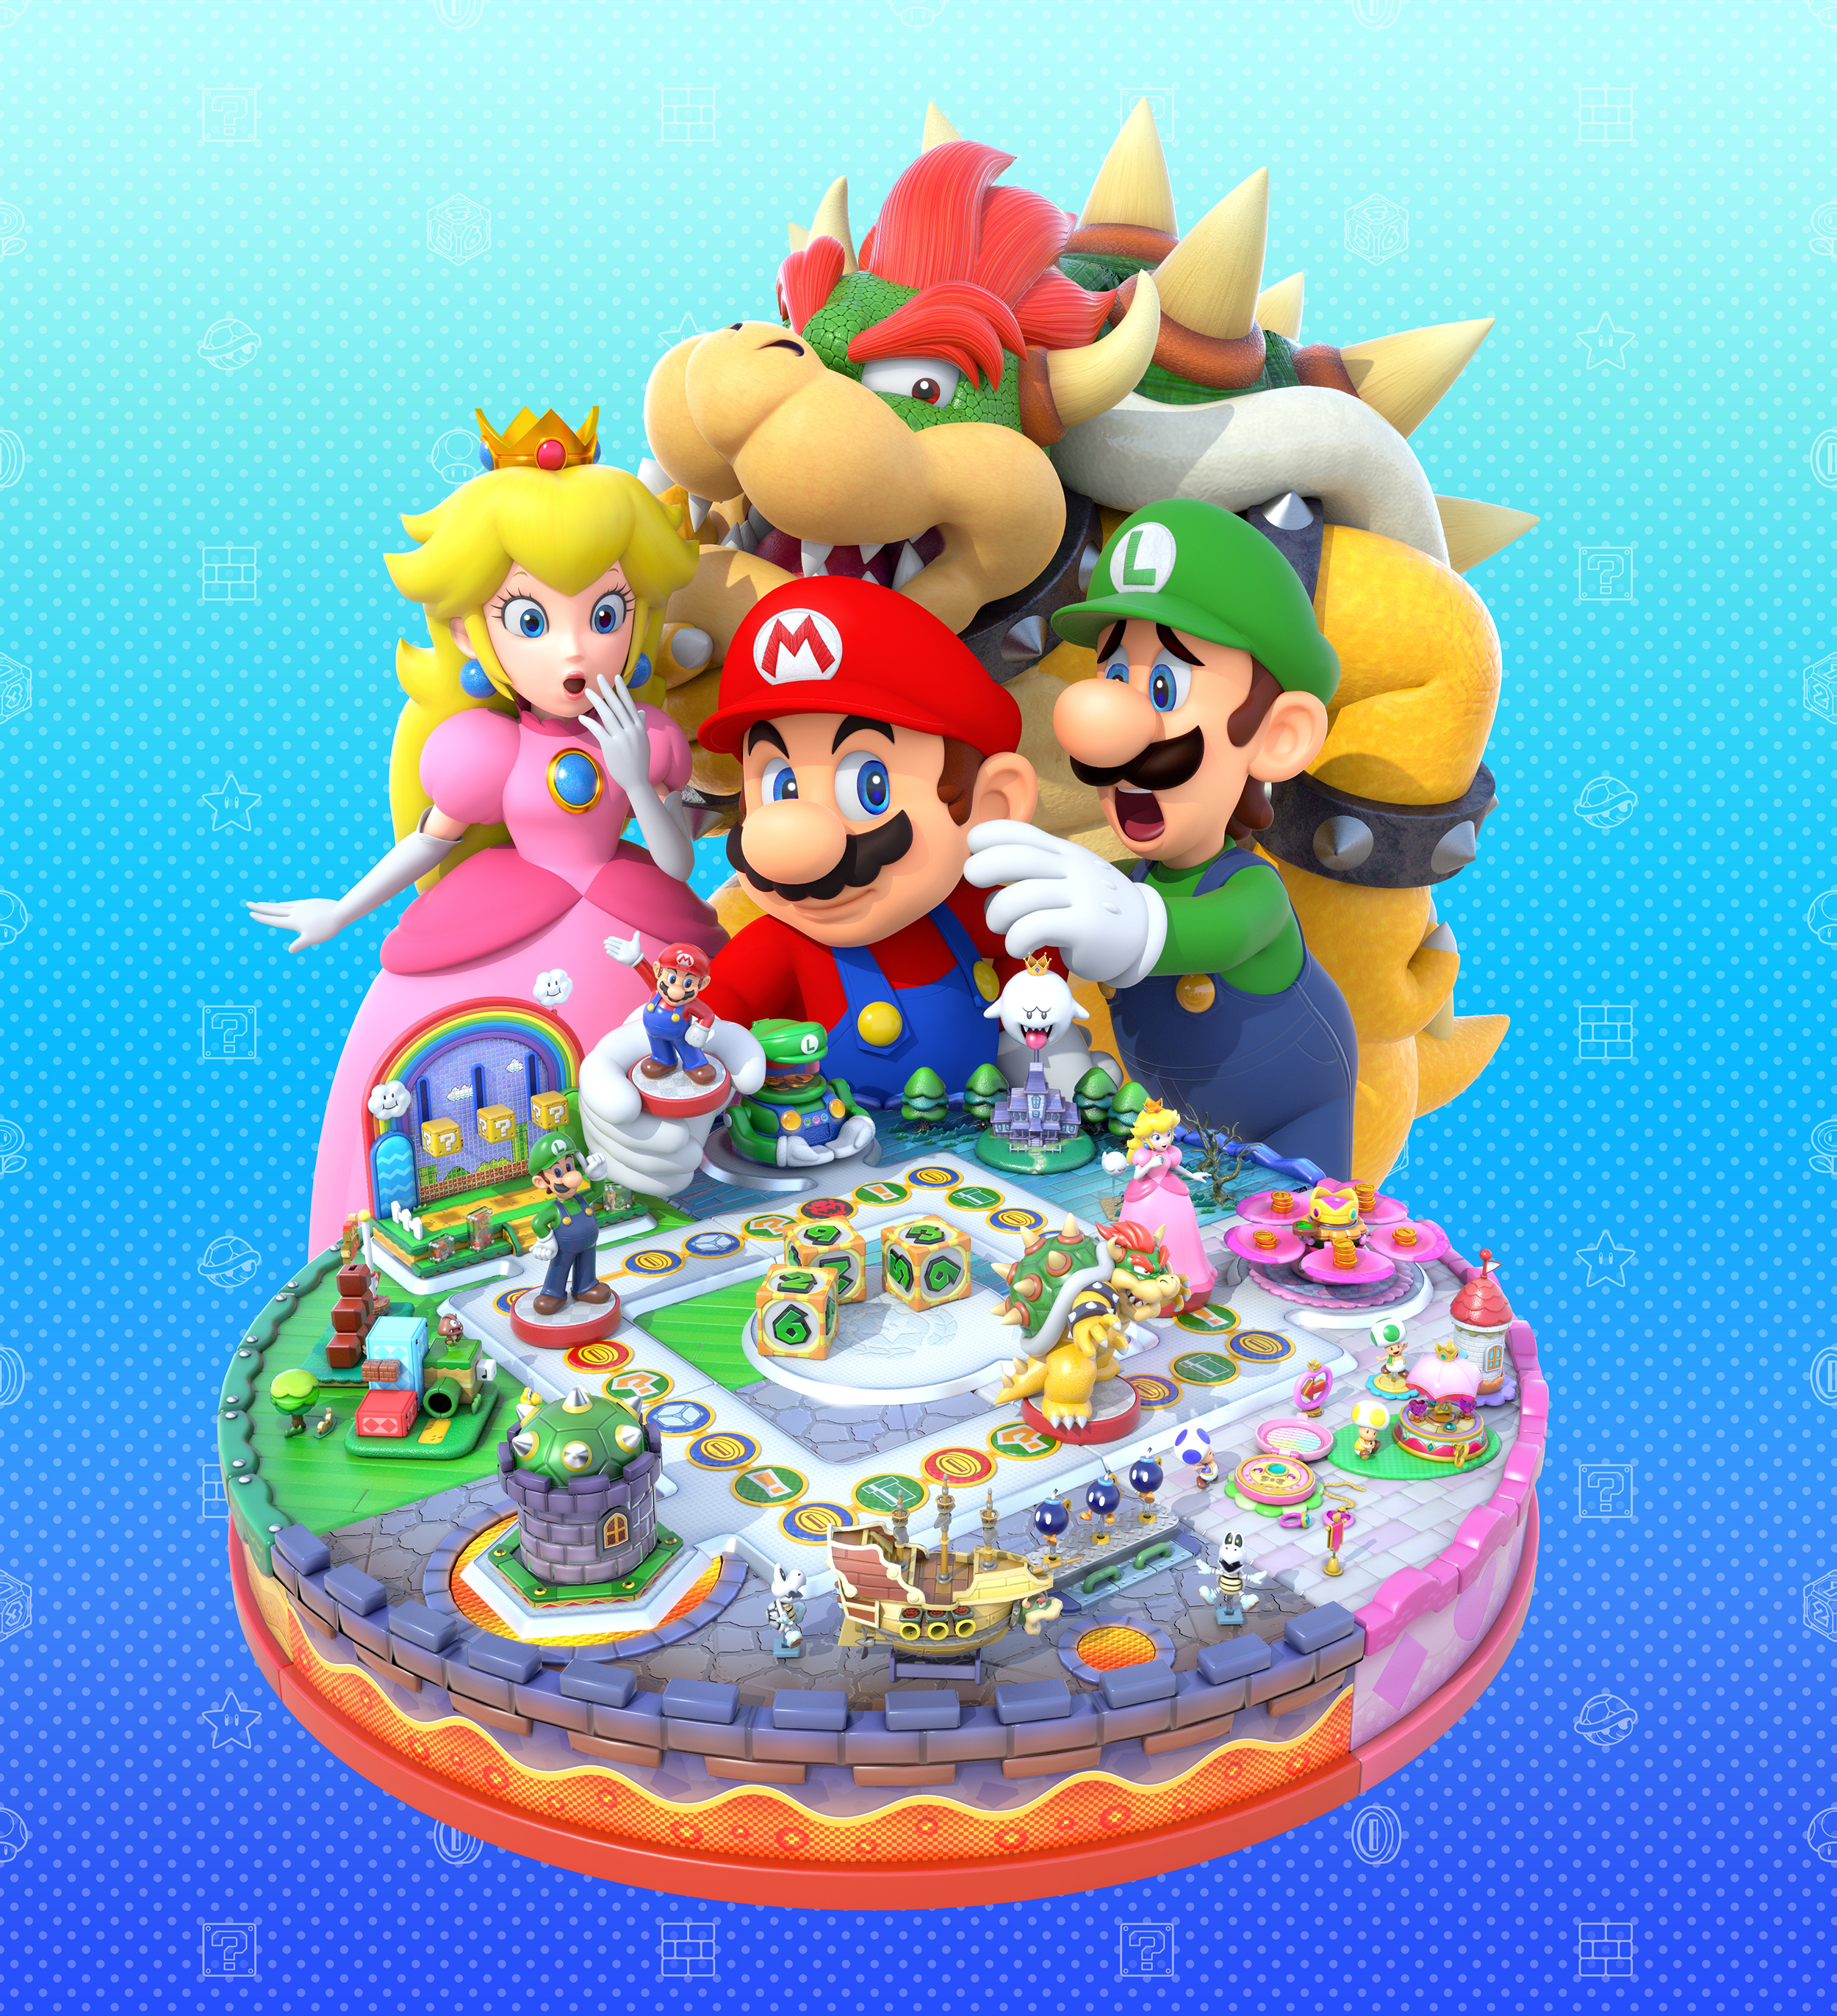 Mario Party 10 Archives - Nintendo Everything